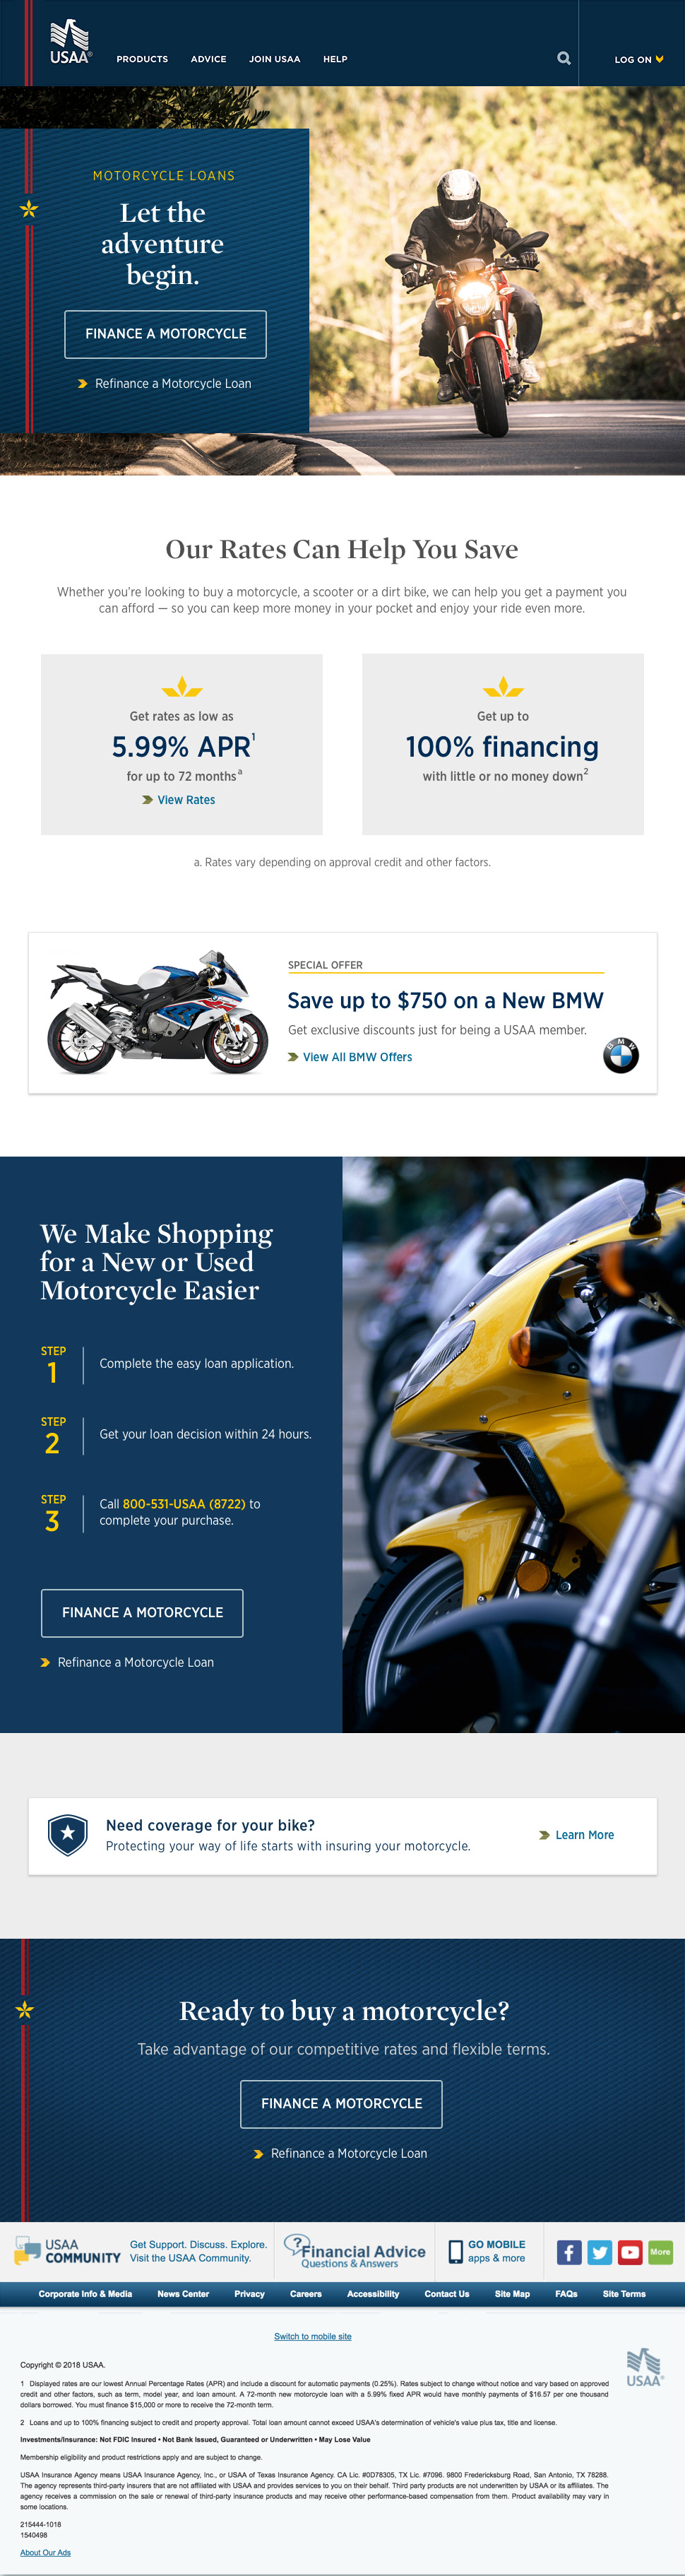 Patton King Designs - USAA Motorcycle Loans